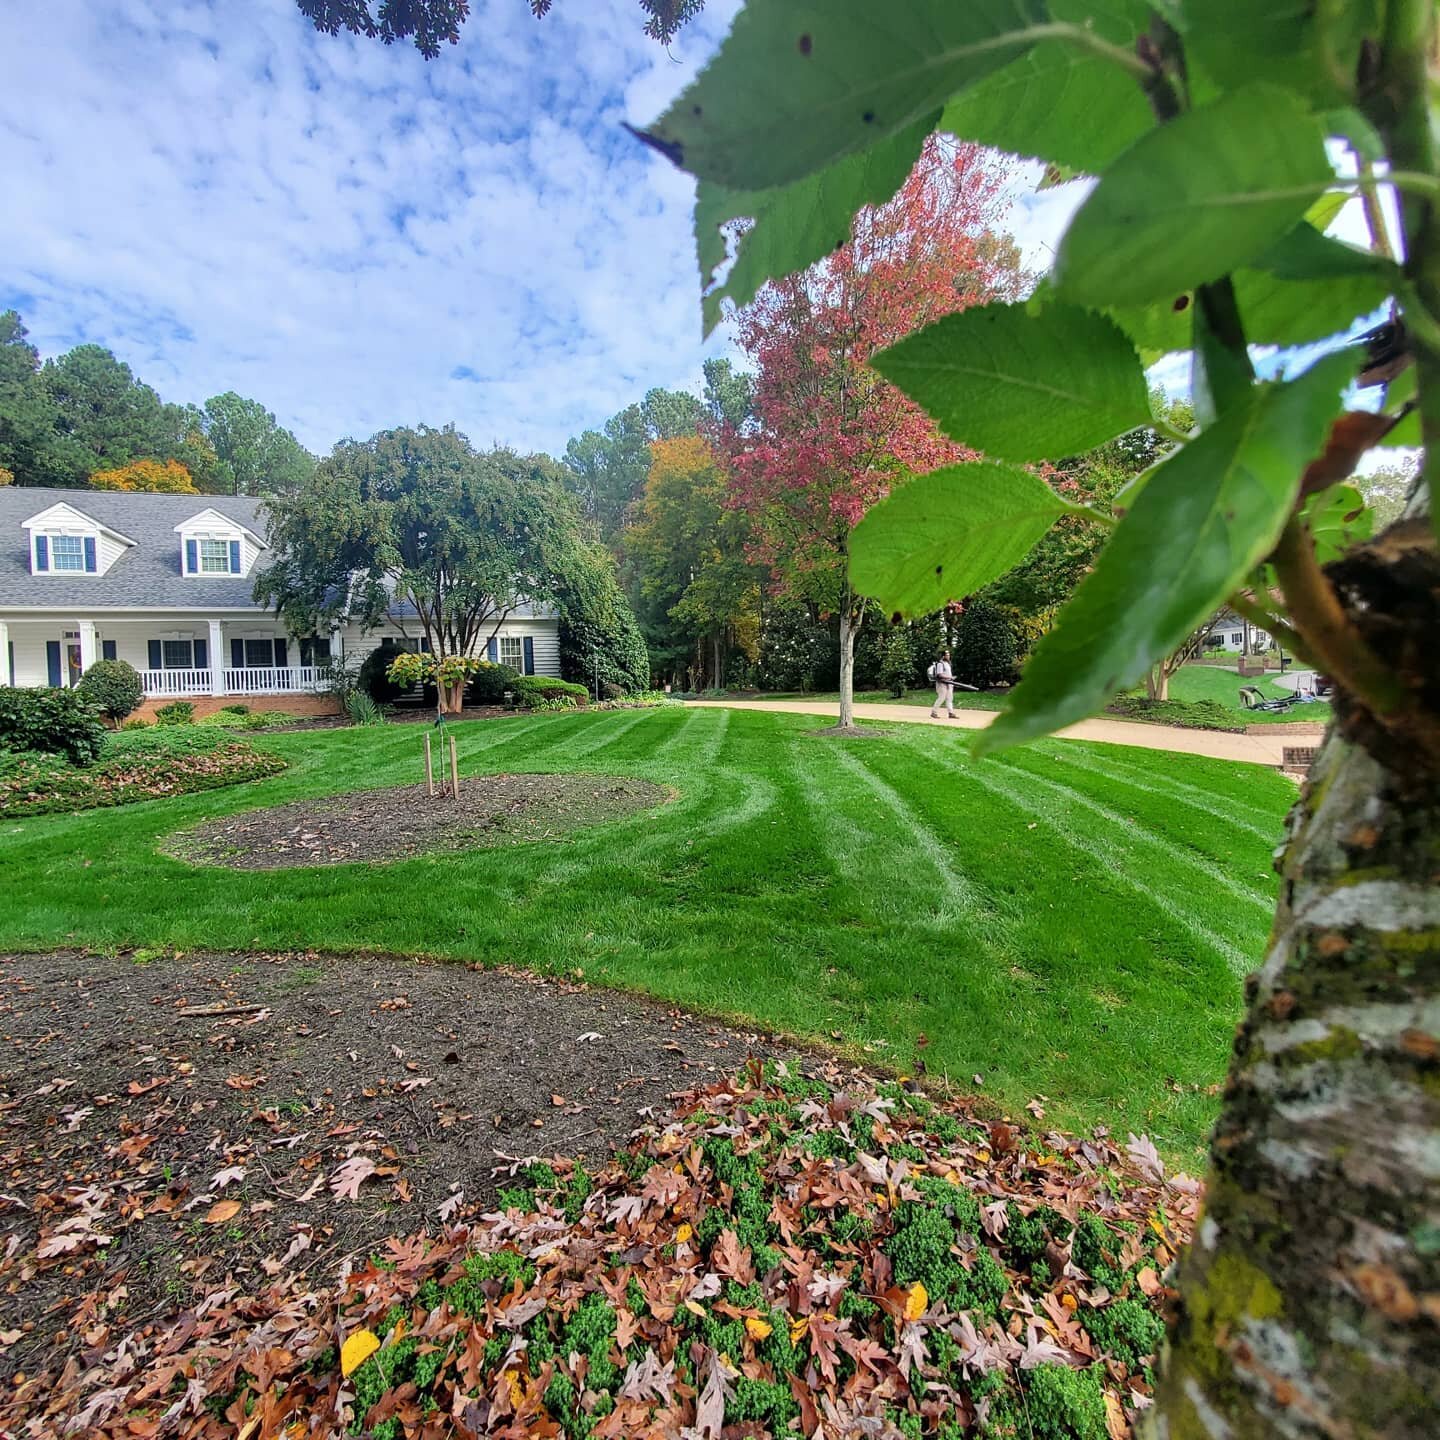 The leaves🍂🍃 are falling and mowing season is coming to a close. So we wanted to drop some of our most recent striping sessions. Happy fall y'all!! 🍂🍁🎃👻🦃

-

#mowing #stripes #toro #lawncare #landscaping #Firststring